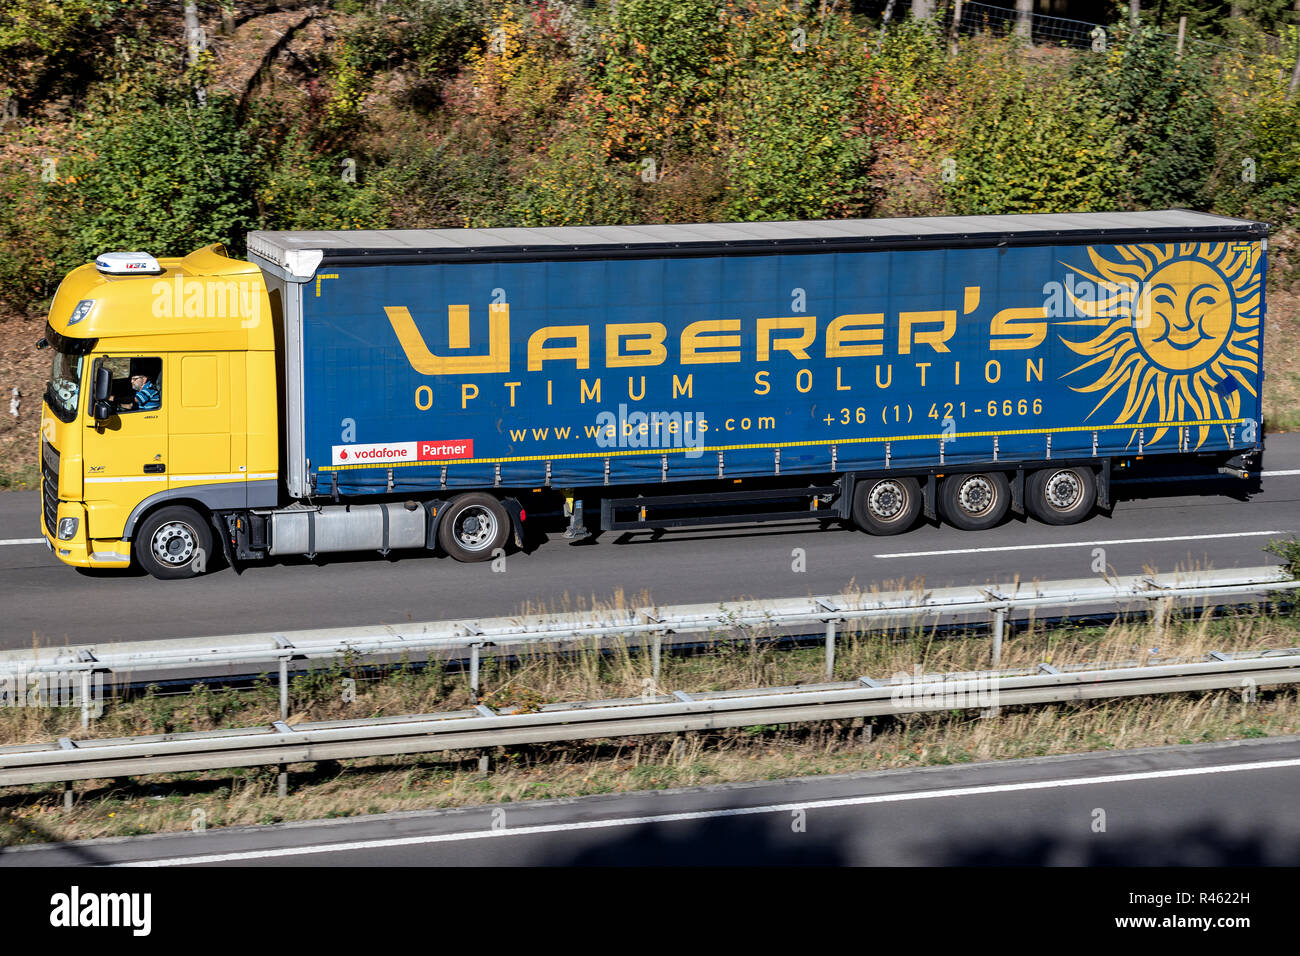 Waberer’s truck on motorway. With a fleet of over 4,300 trucks and around 7,600 employees, Waberer’s serves customers across 28 countries in Europe. Stock Photo